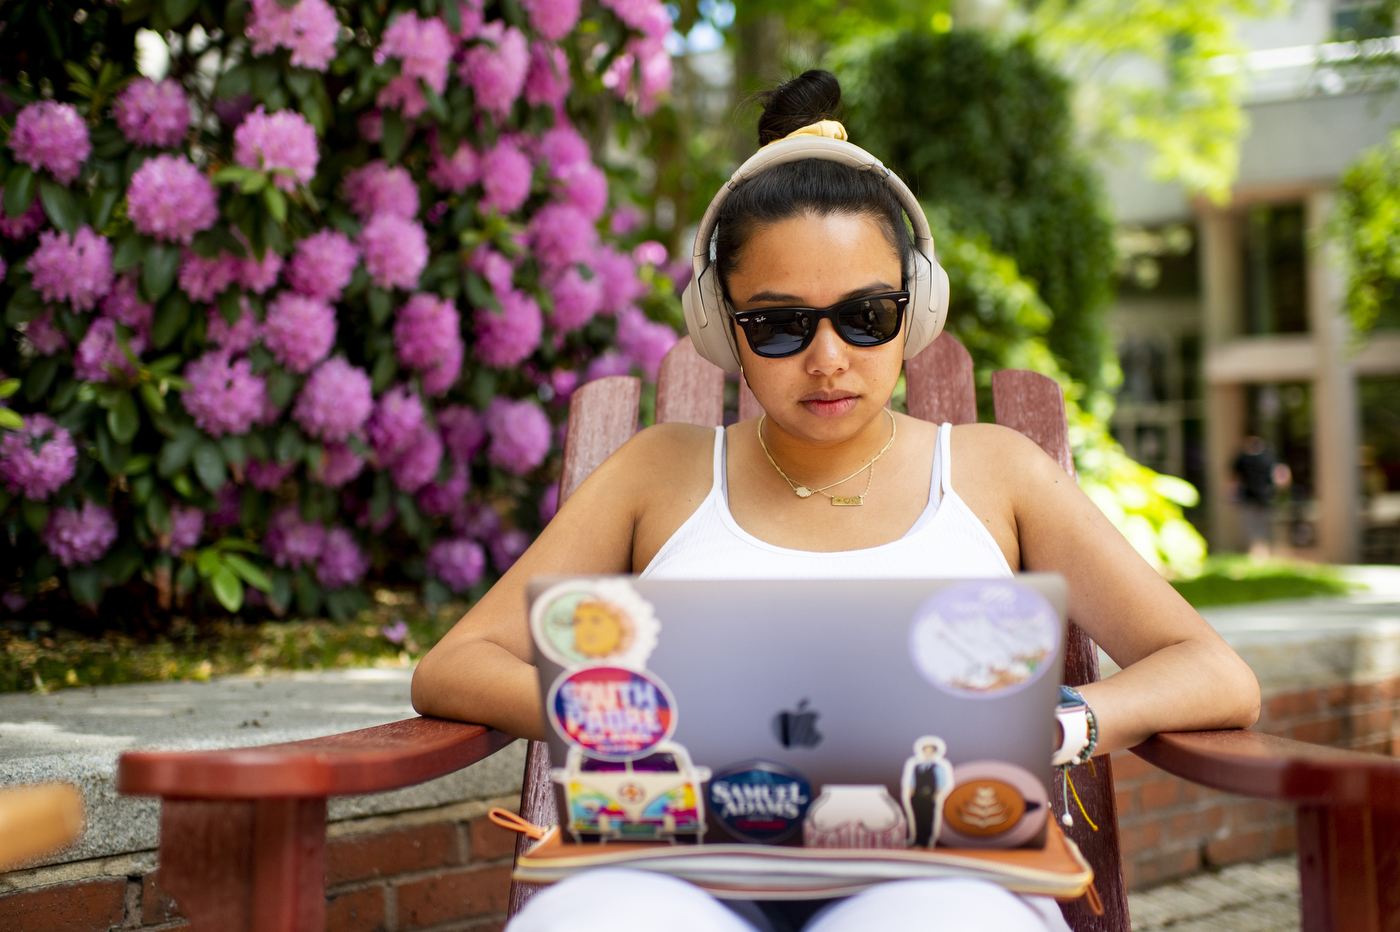 Denise Seno, who is a graduate student in physical therapy, studies on Snell Quad. Photo by Ruby Wallau/Northeastern University